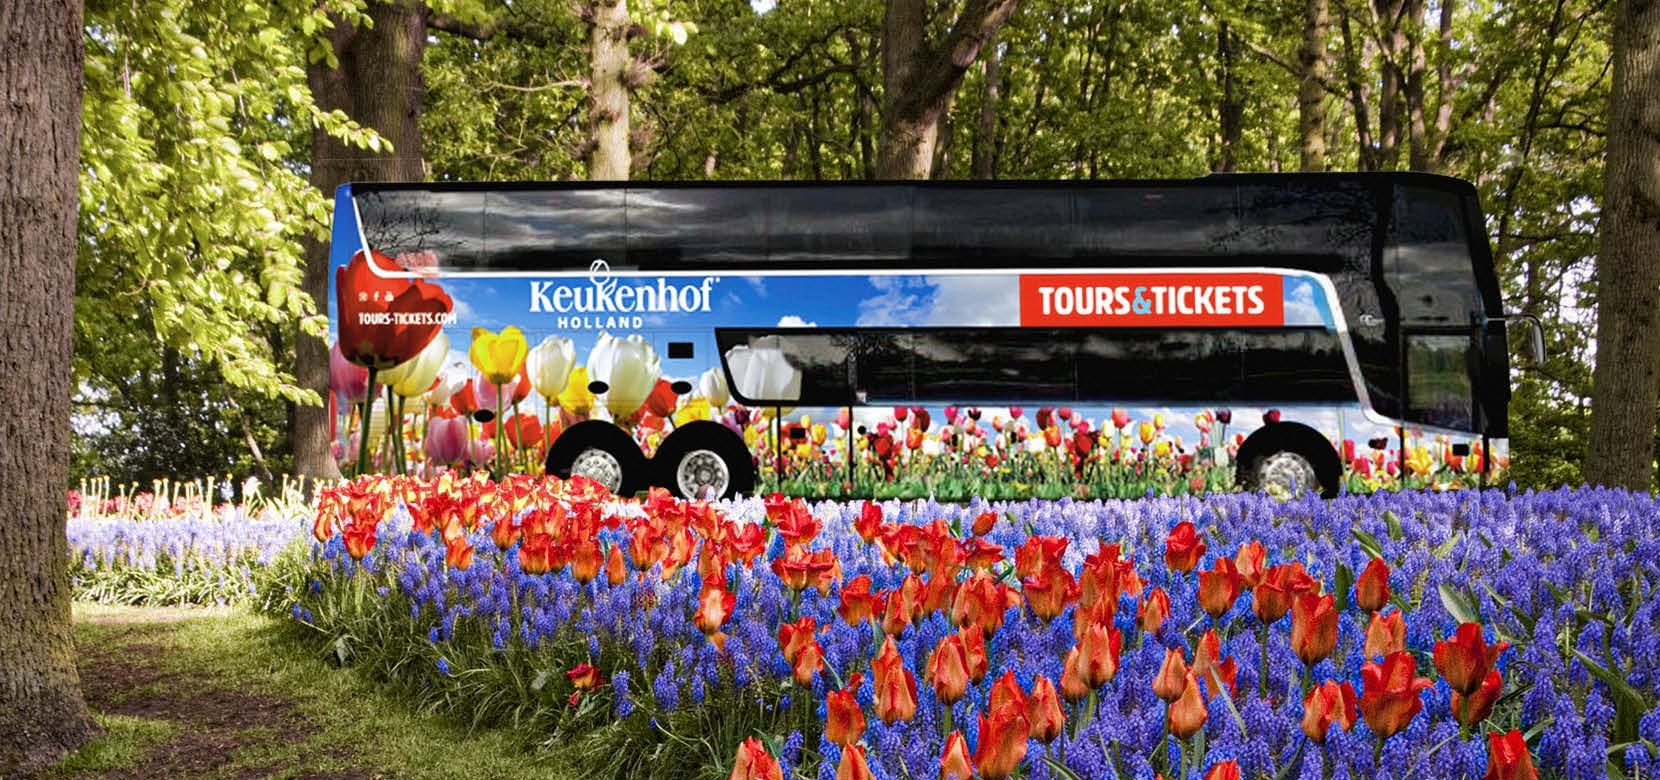 Skip-the-line Keukenhof ticket with transport from Amsterdam